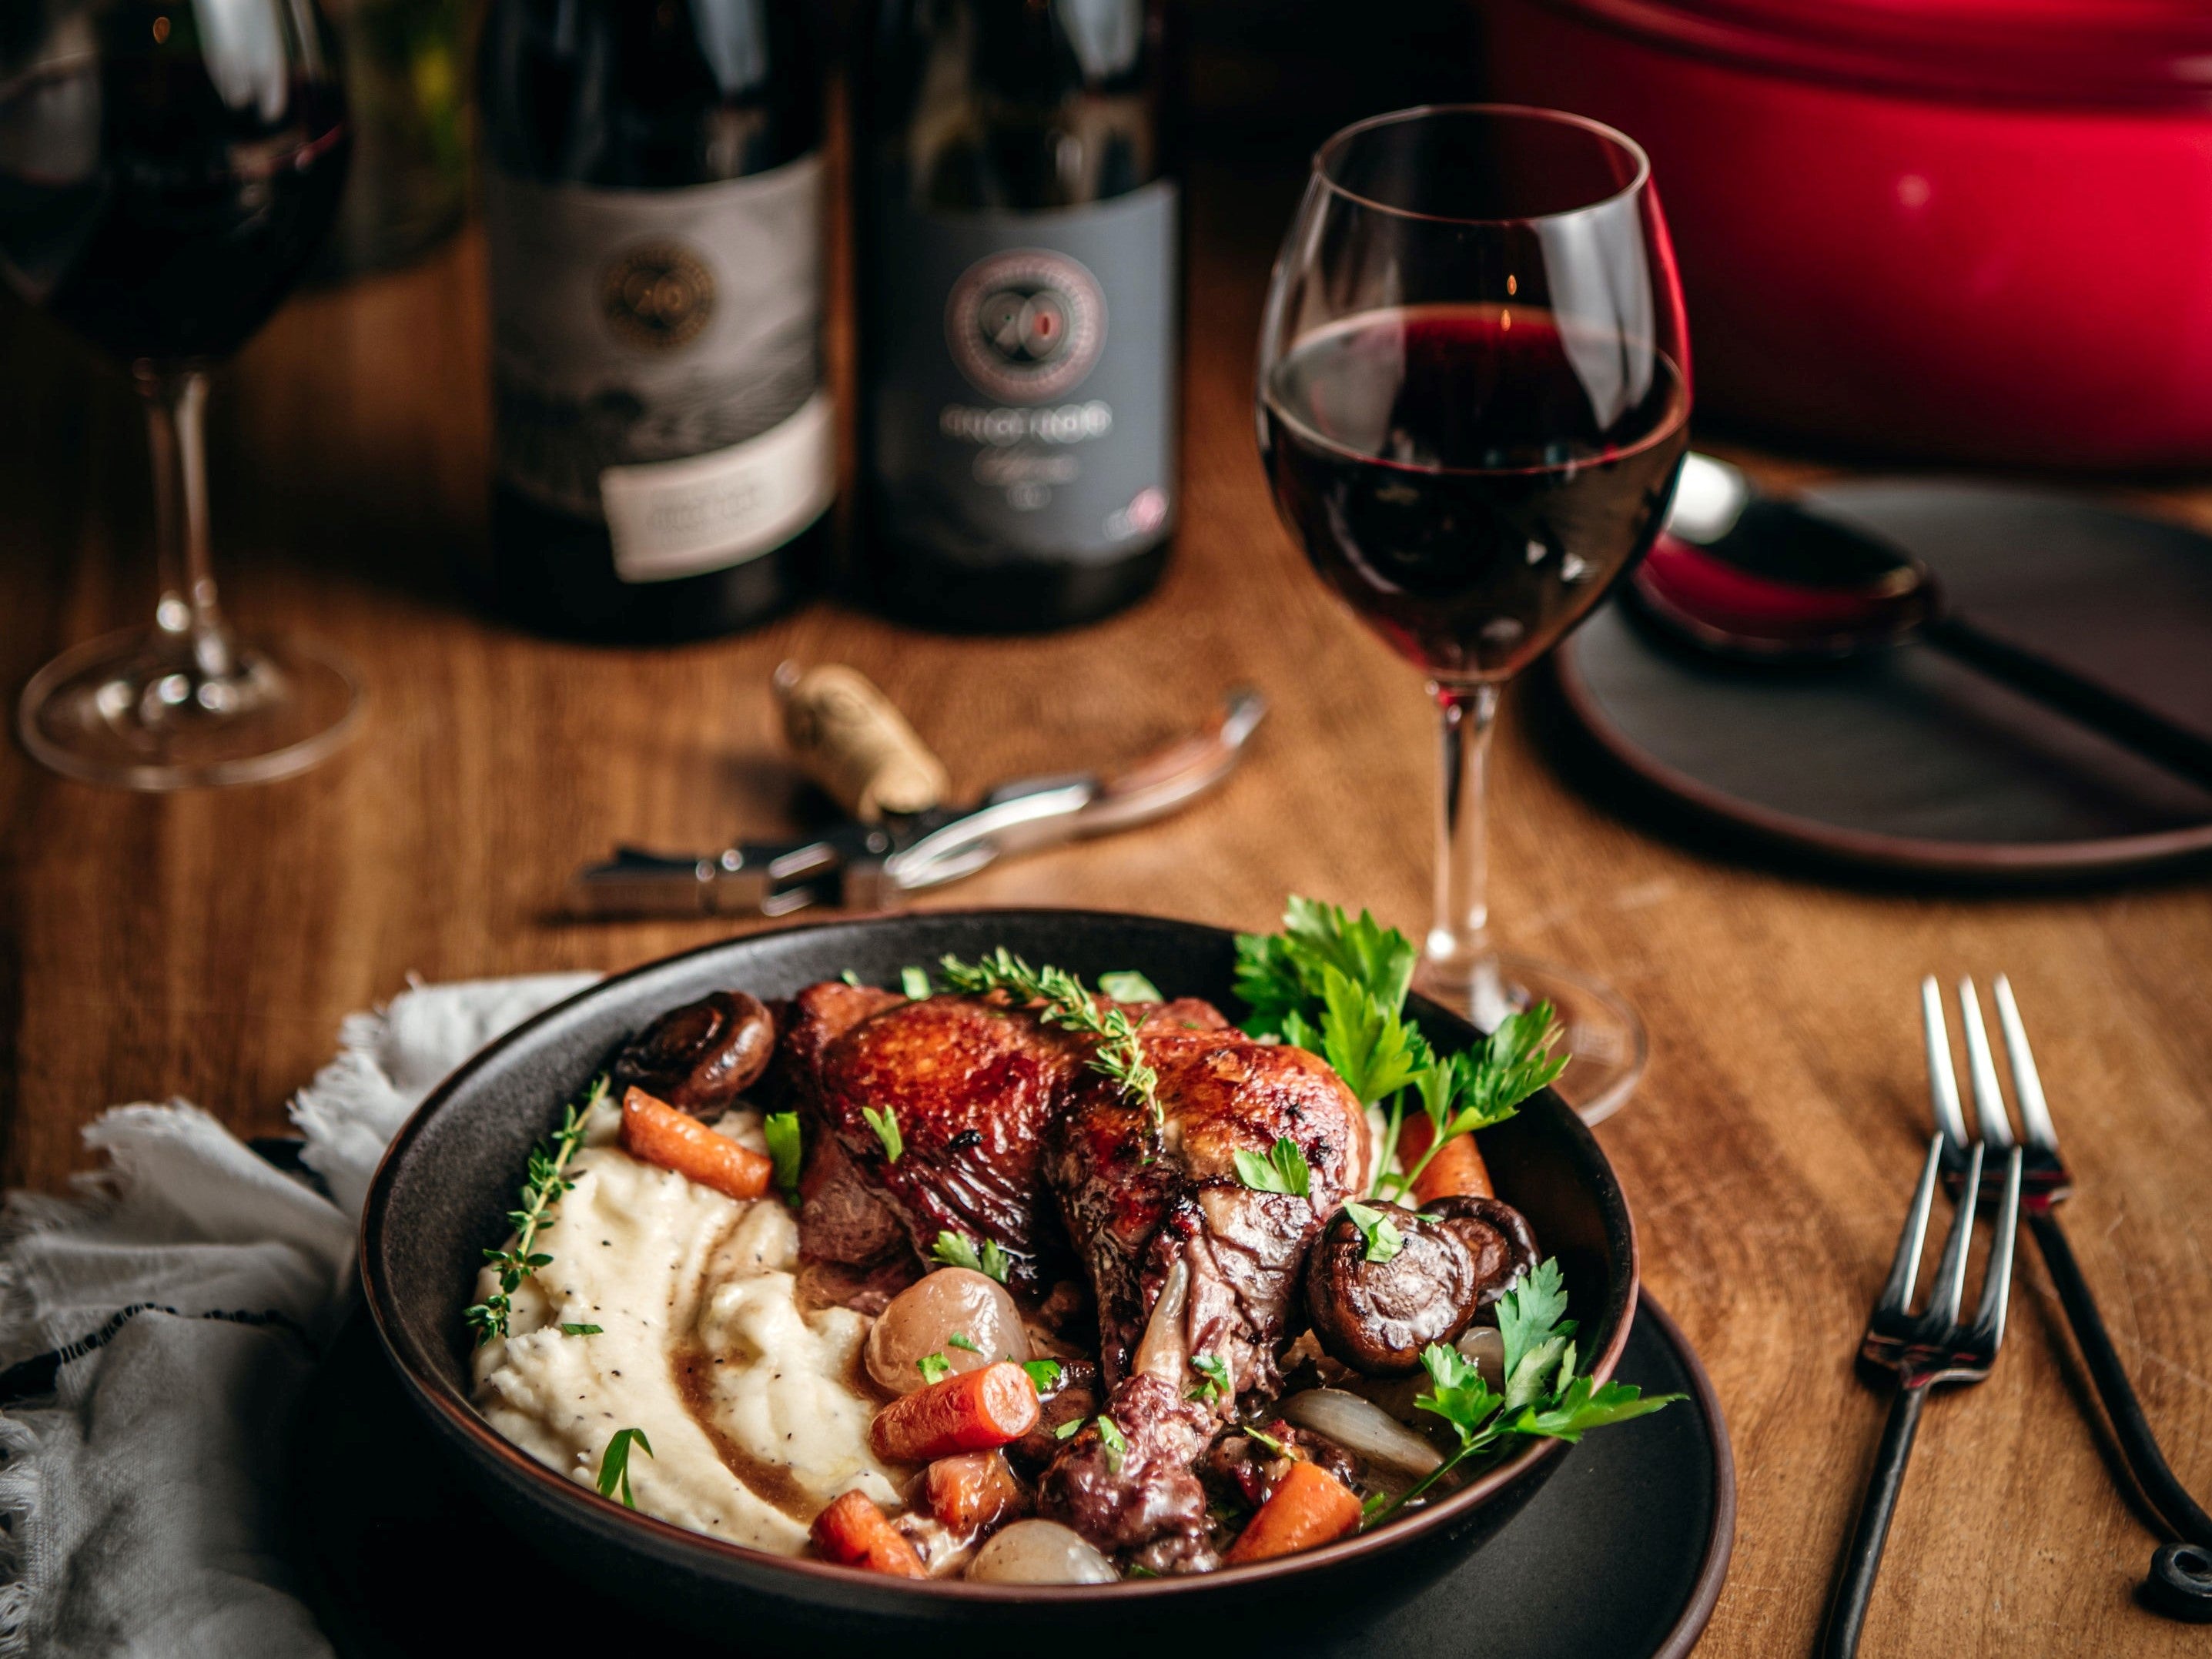 3 Cozy Fall Recipes With 90+ Cellars Lot 75 Russian River Valley Pinot Noir, Lot 179 Pinot Noir, and Lot 207 Chianti